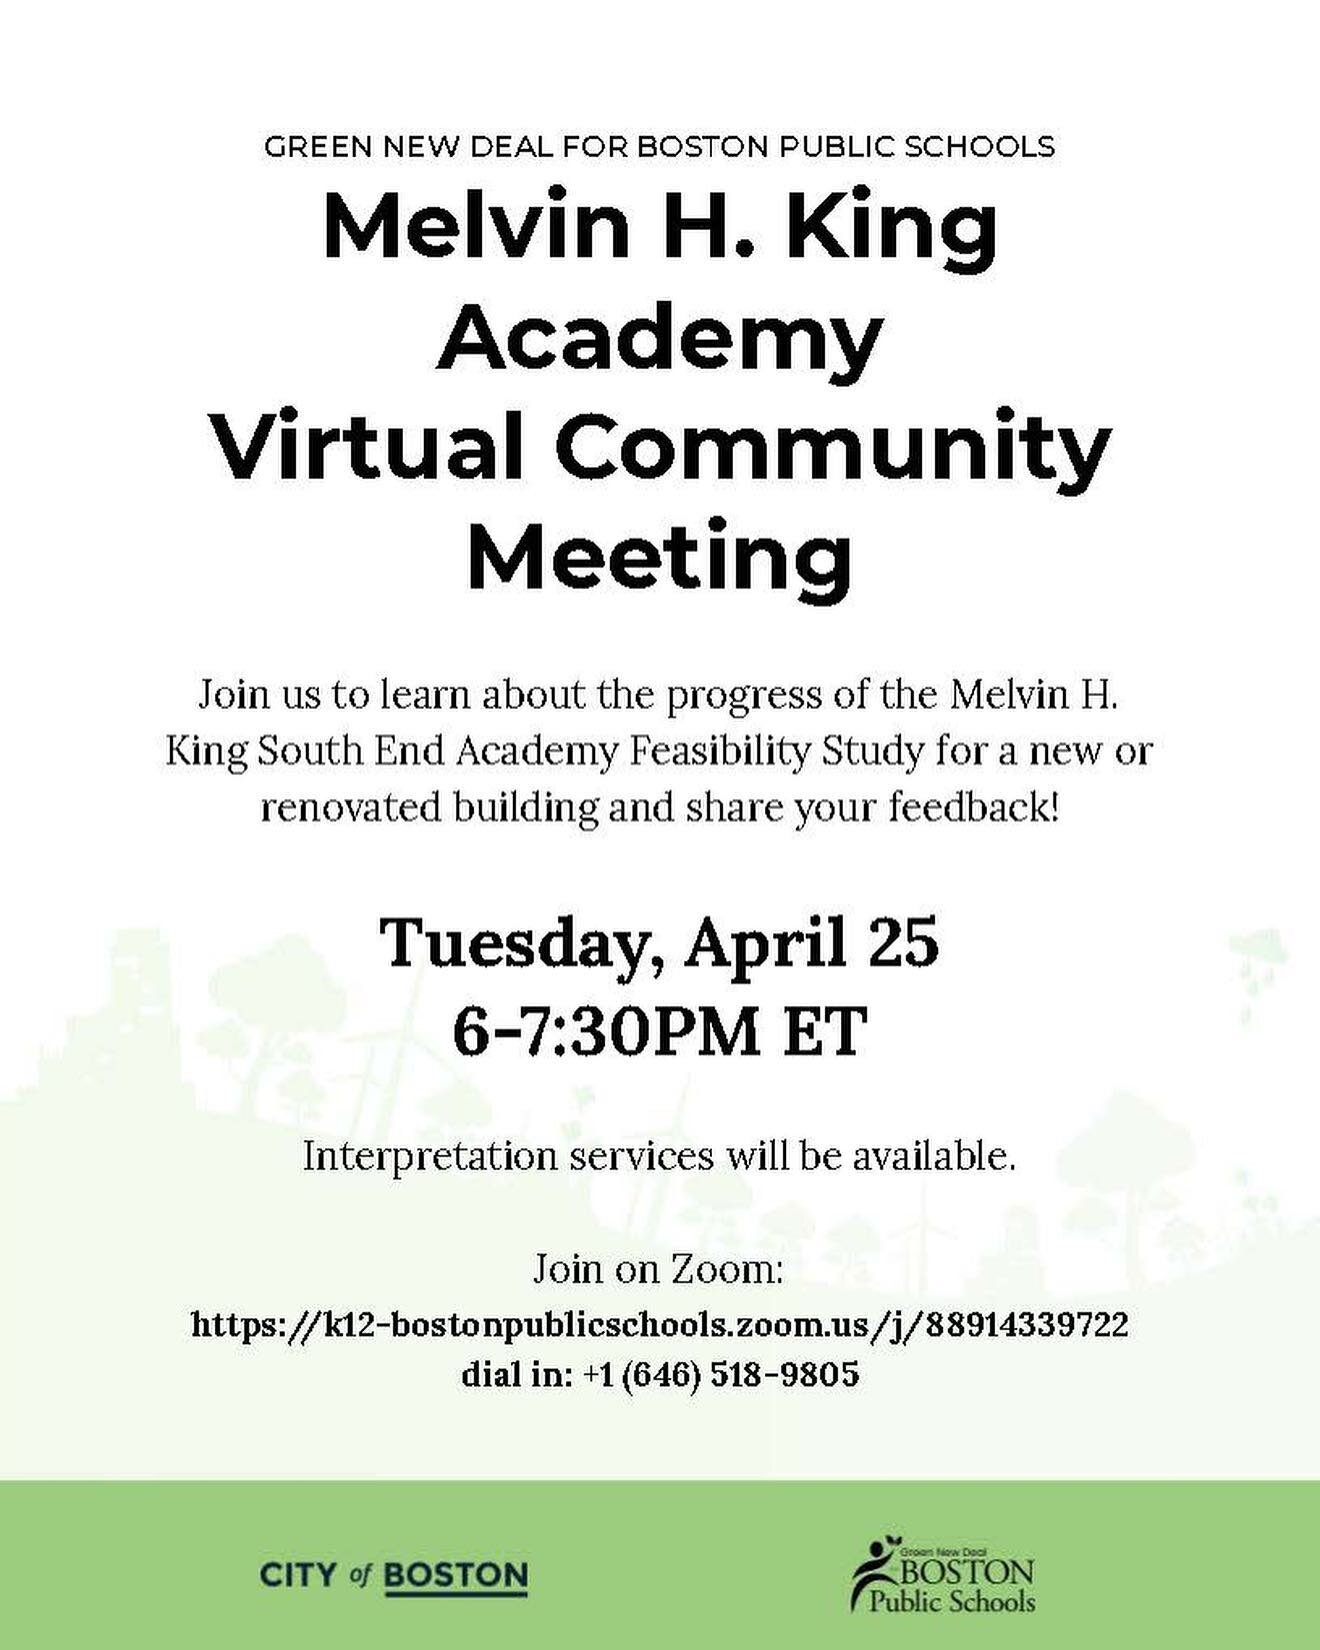 Tomorrow night at 6 p.m., the Melvin H. King South End Academy Team and BPS Capital Planning Team are hosting a virtual meeting for the Melvin H. King Academy (formerly McKinley) design &amp; feasibility study! This will be the first of three communi